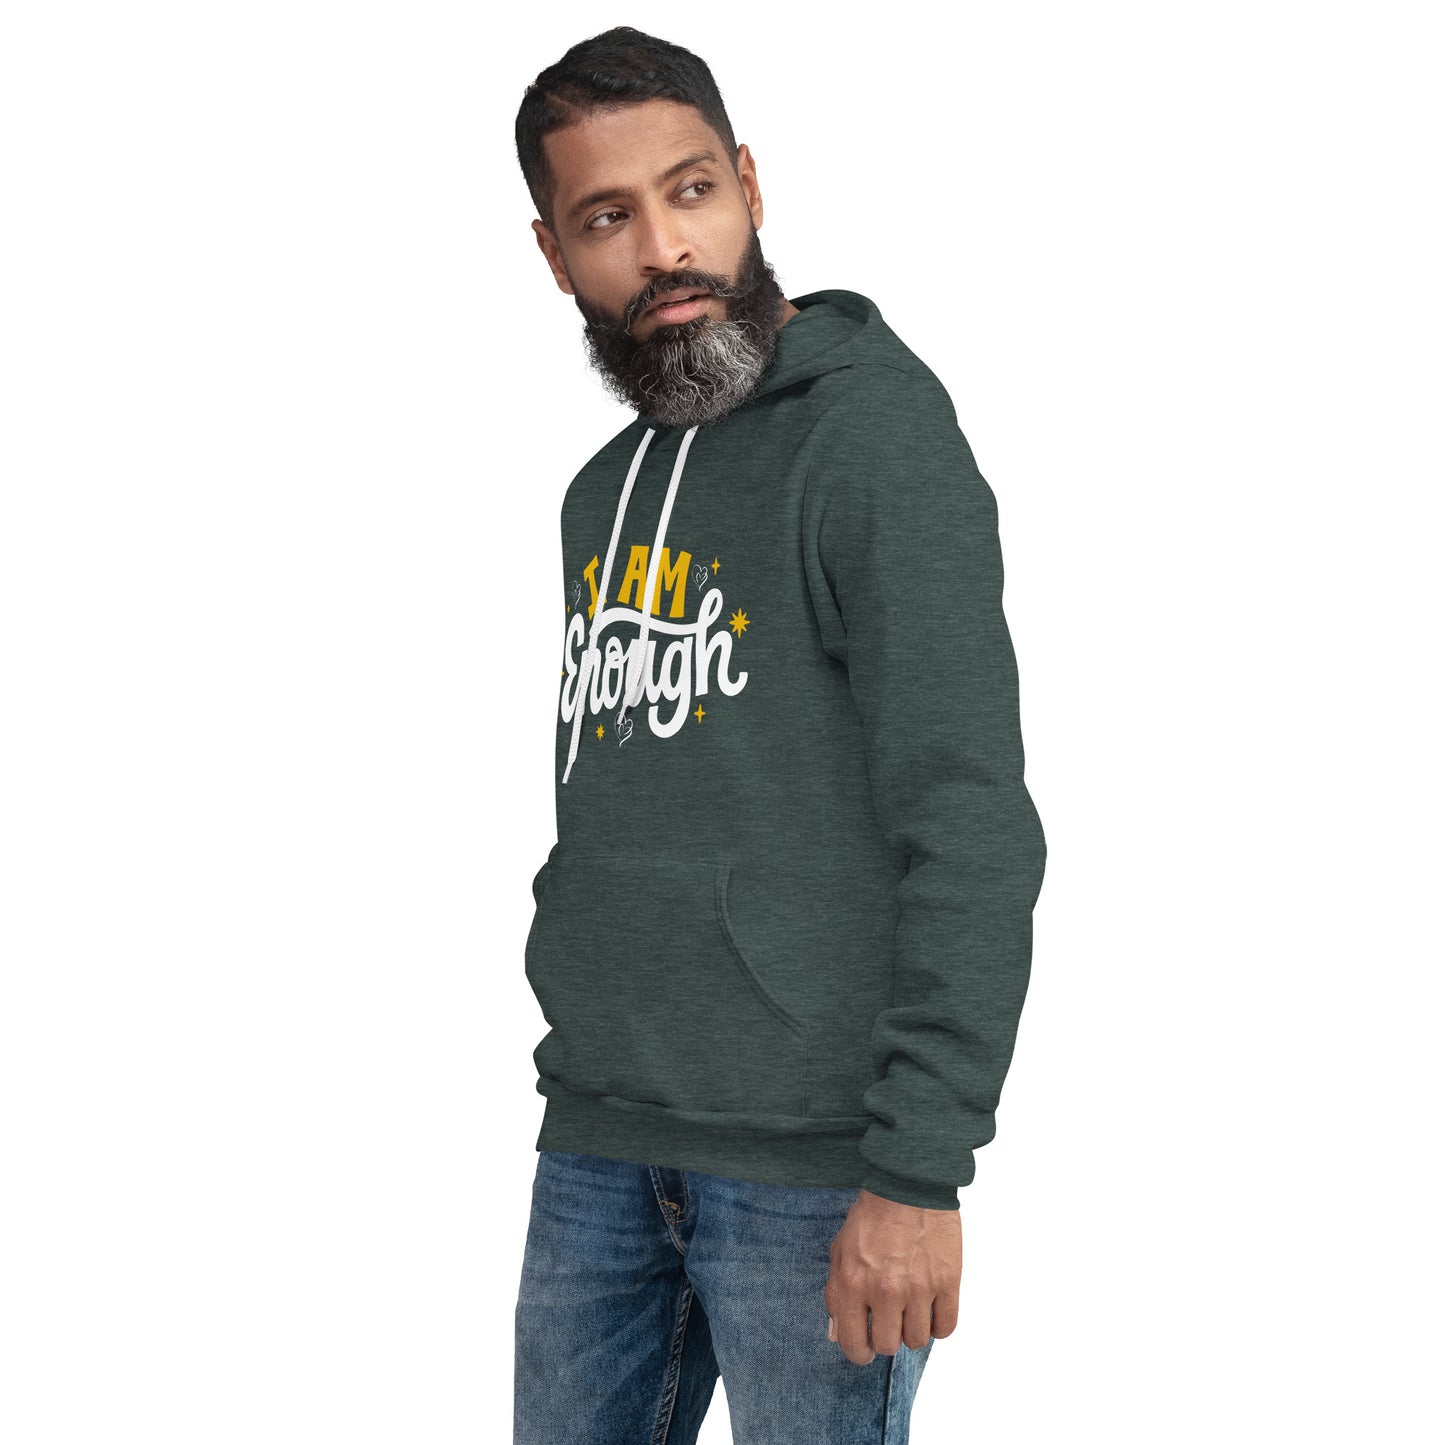 Versatile 'I Am Enough' Unisex Hoodie with Branded Logo - Comfort for Every Season